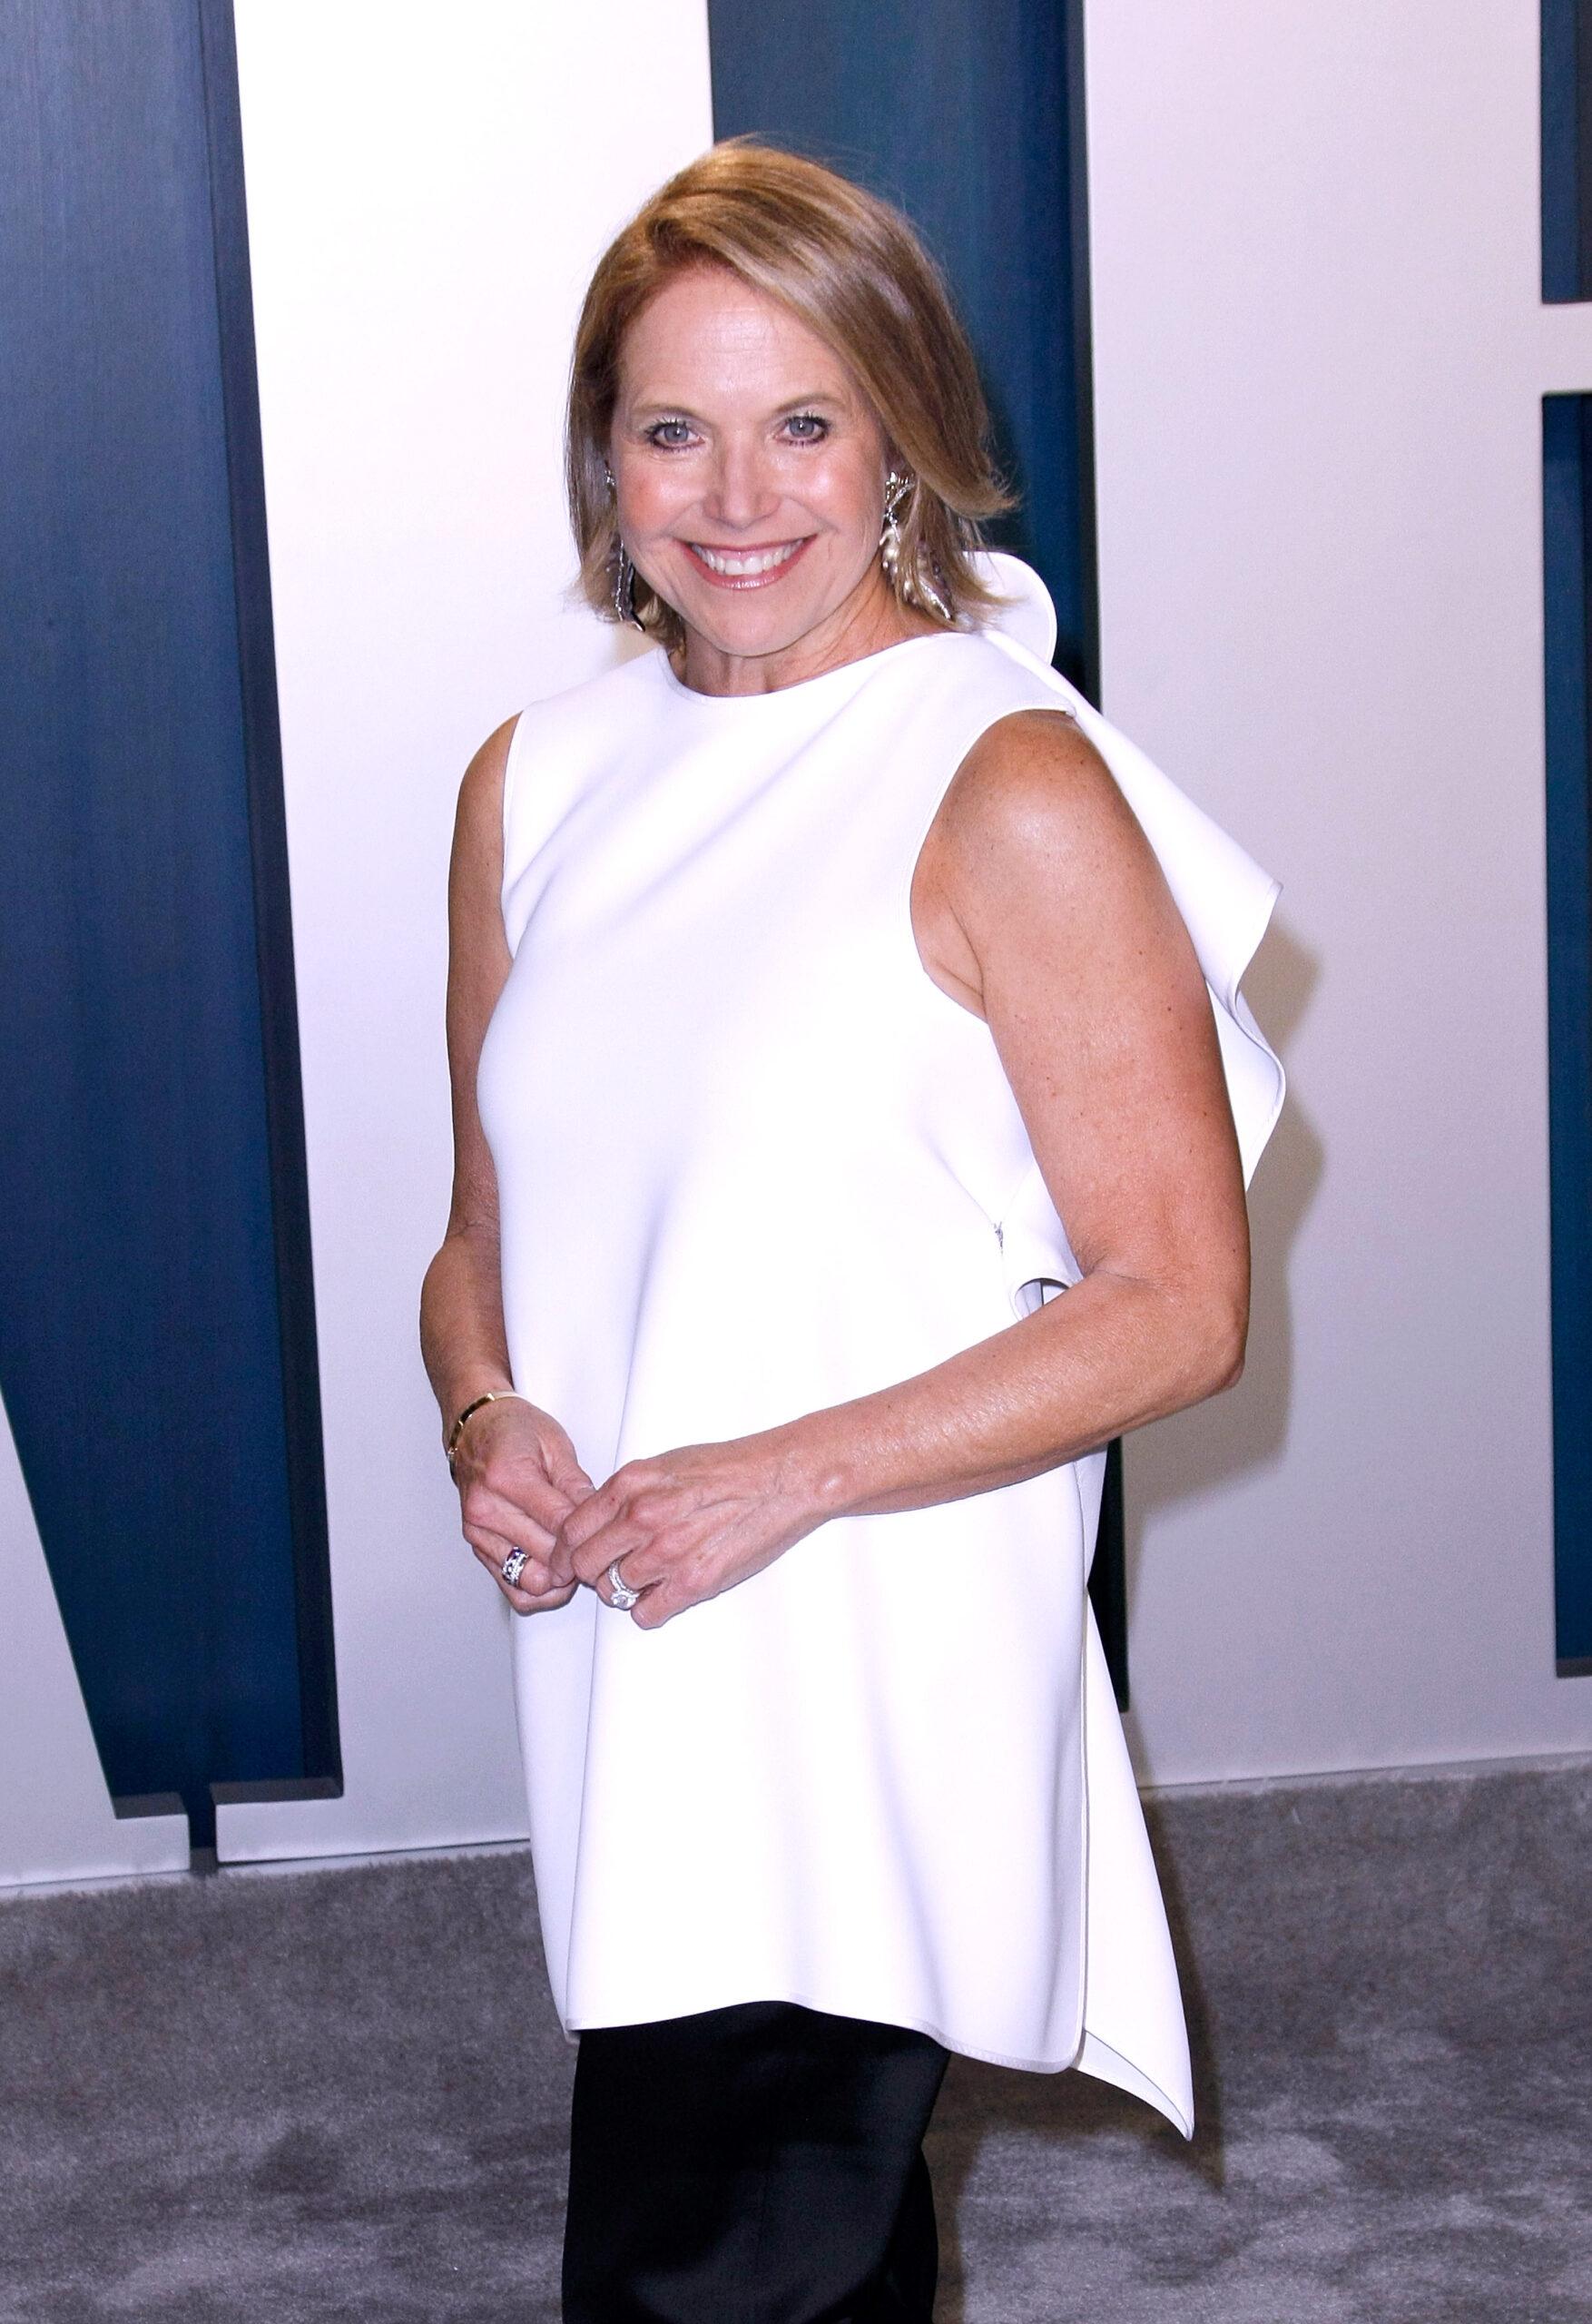 Katie Couric at the 2020 Vanity Fair Oscar Party